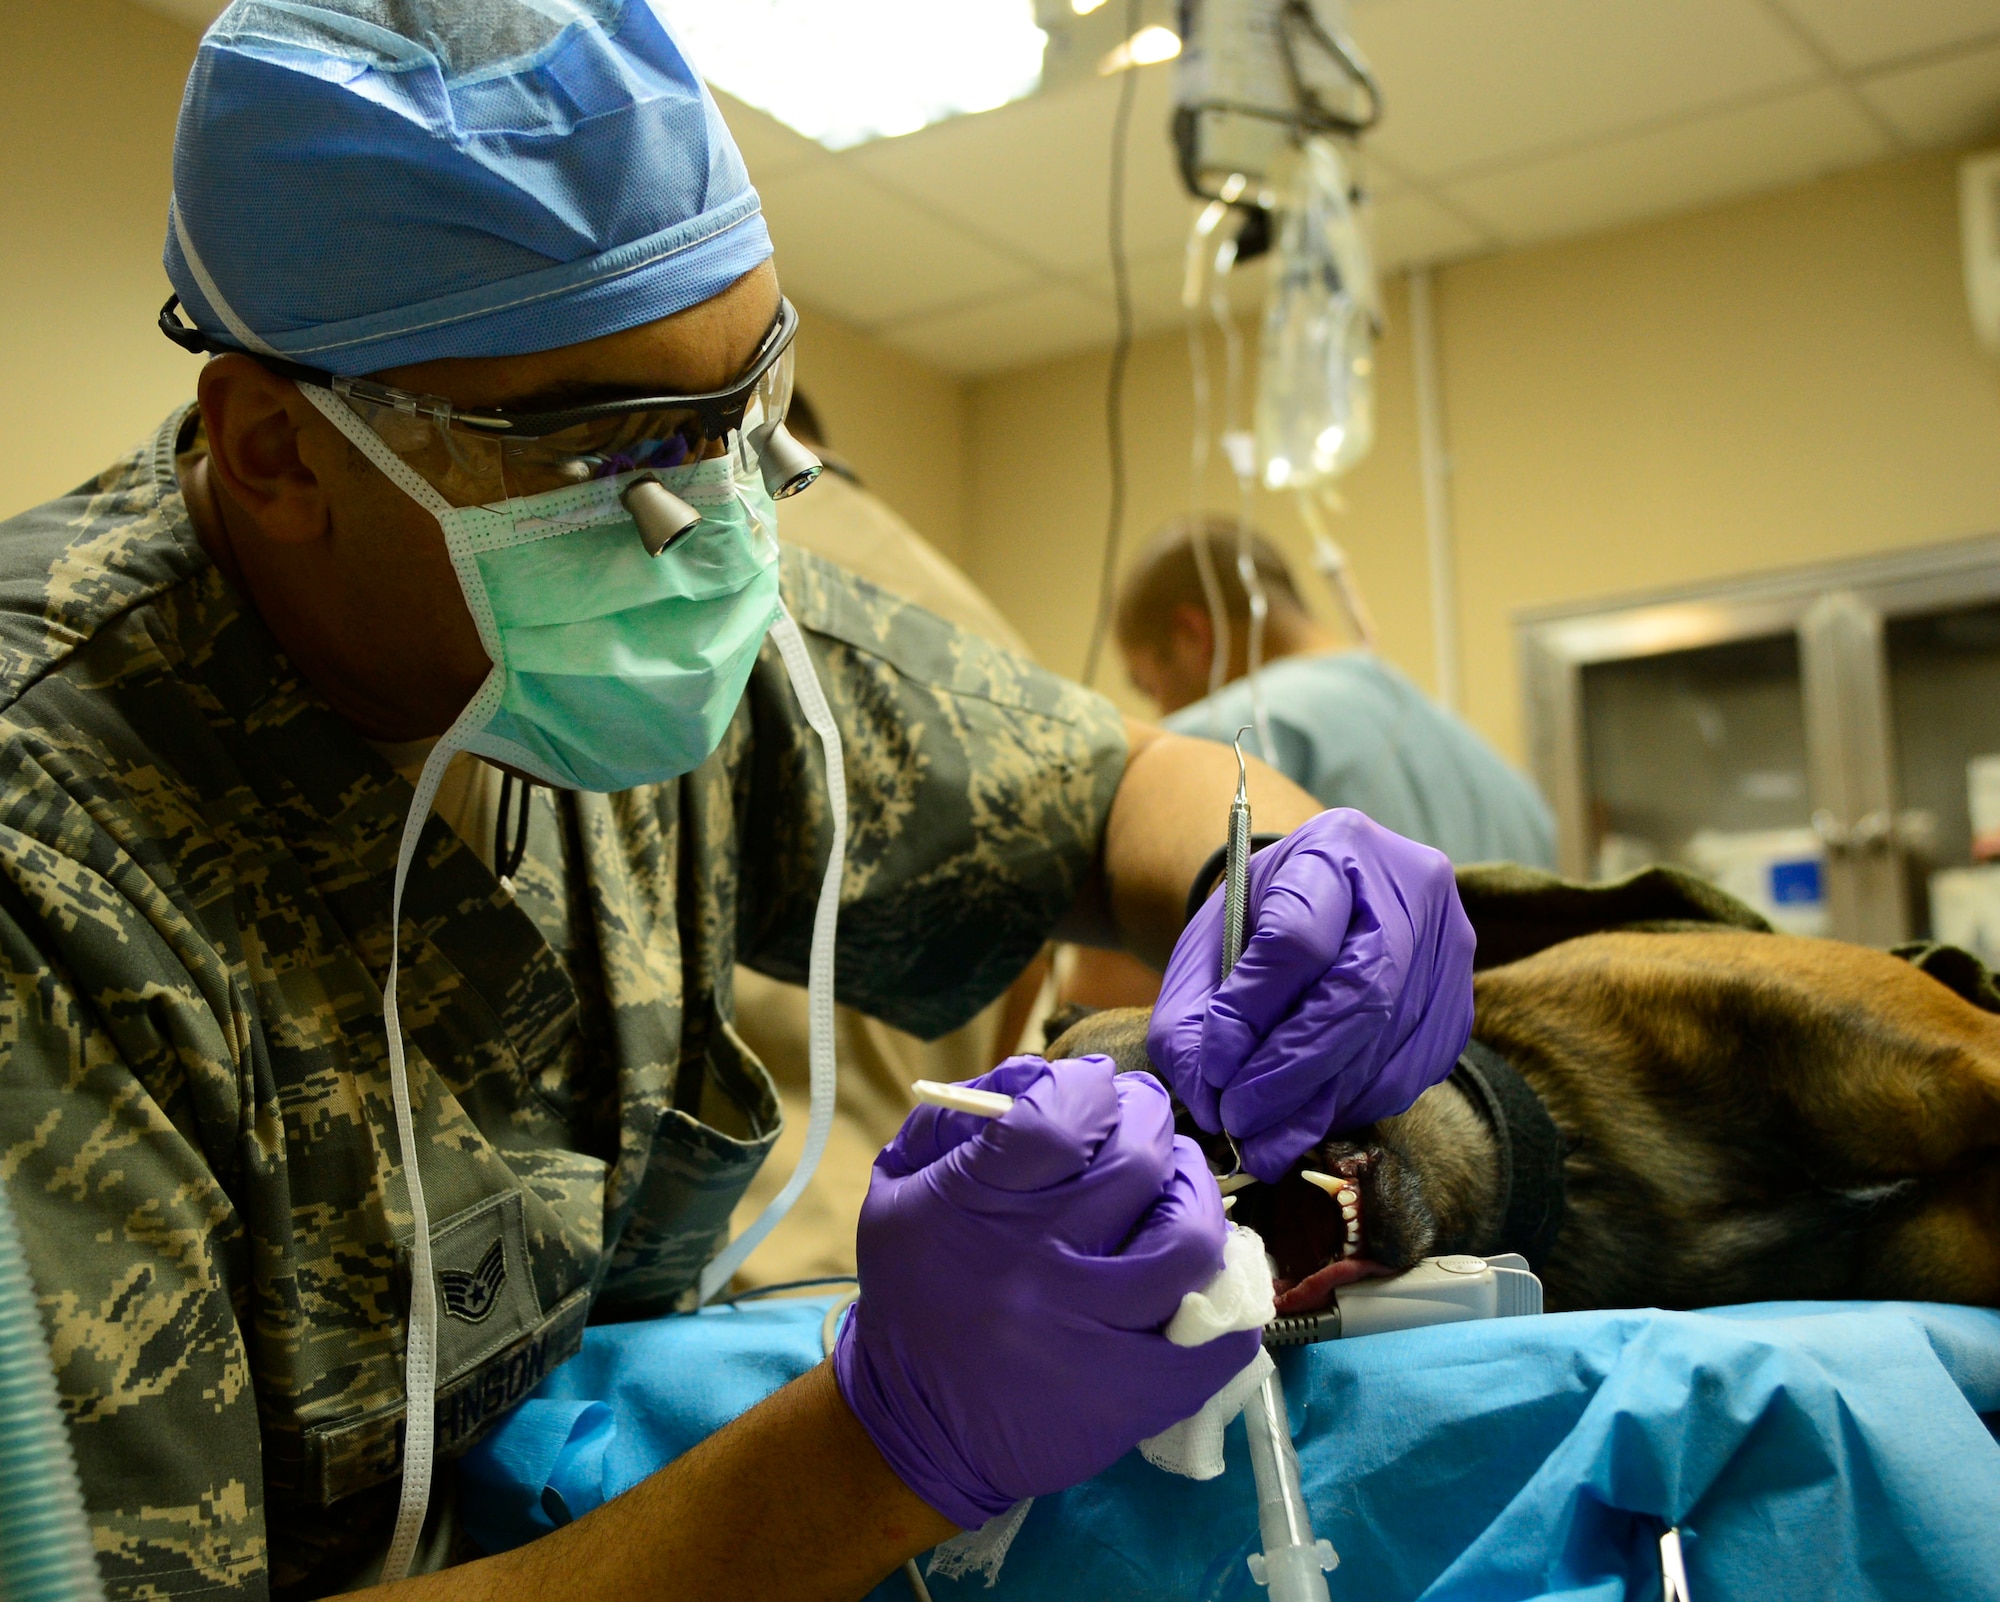 Staff Sgt. Gregory Johnson, of the 386th Expeditionary Medical Support Squadron, removes plaque from a military working dog’s teeth during a dental cleaning in Southwest Asia, Aug. 27, 2015. MWD FFrida is with the 386th Expeditionary Security Forces Squadron. MWDs receive routine medical care so they can aid their human military partners in the fight against the Islamic State of Iraq and the Levant terrorist group. (U.S. Air Force photo/Senior Airman Racheal E. Watson)